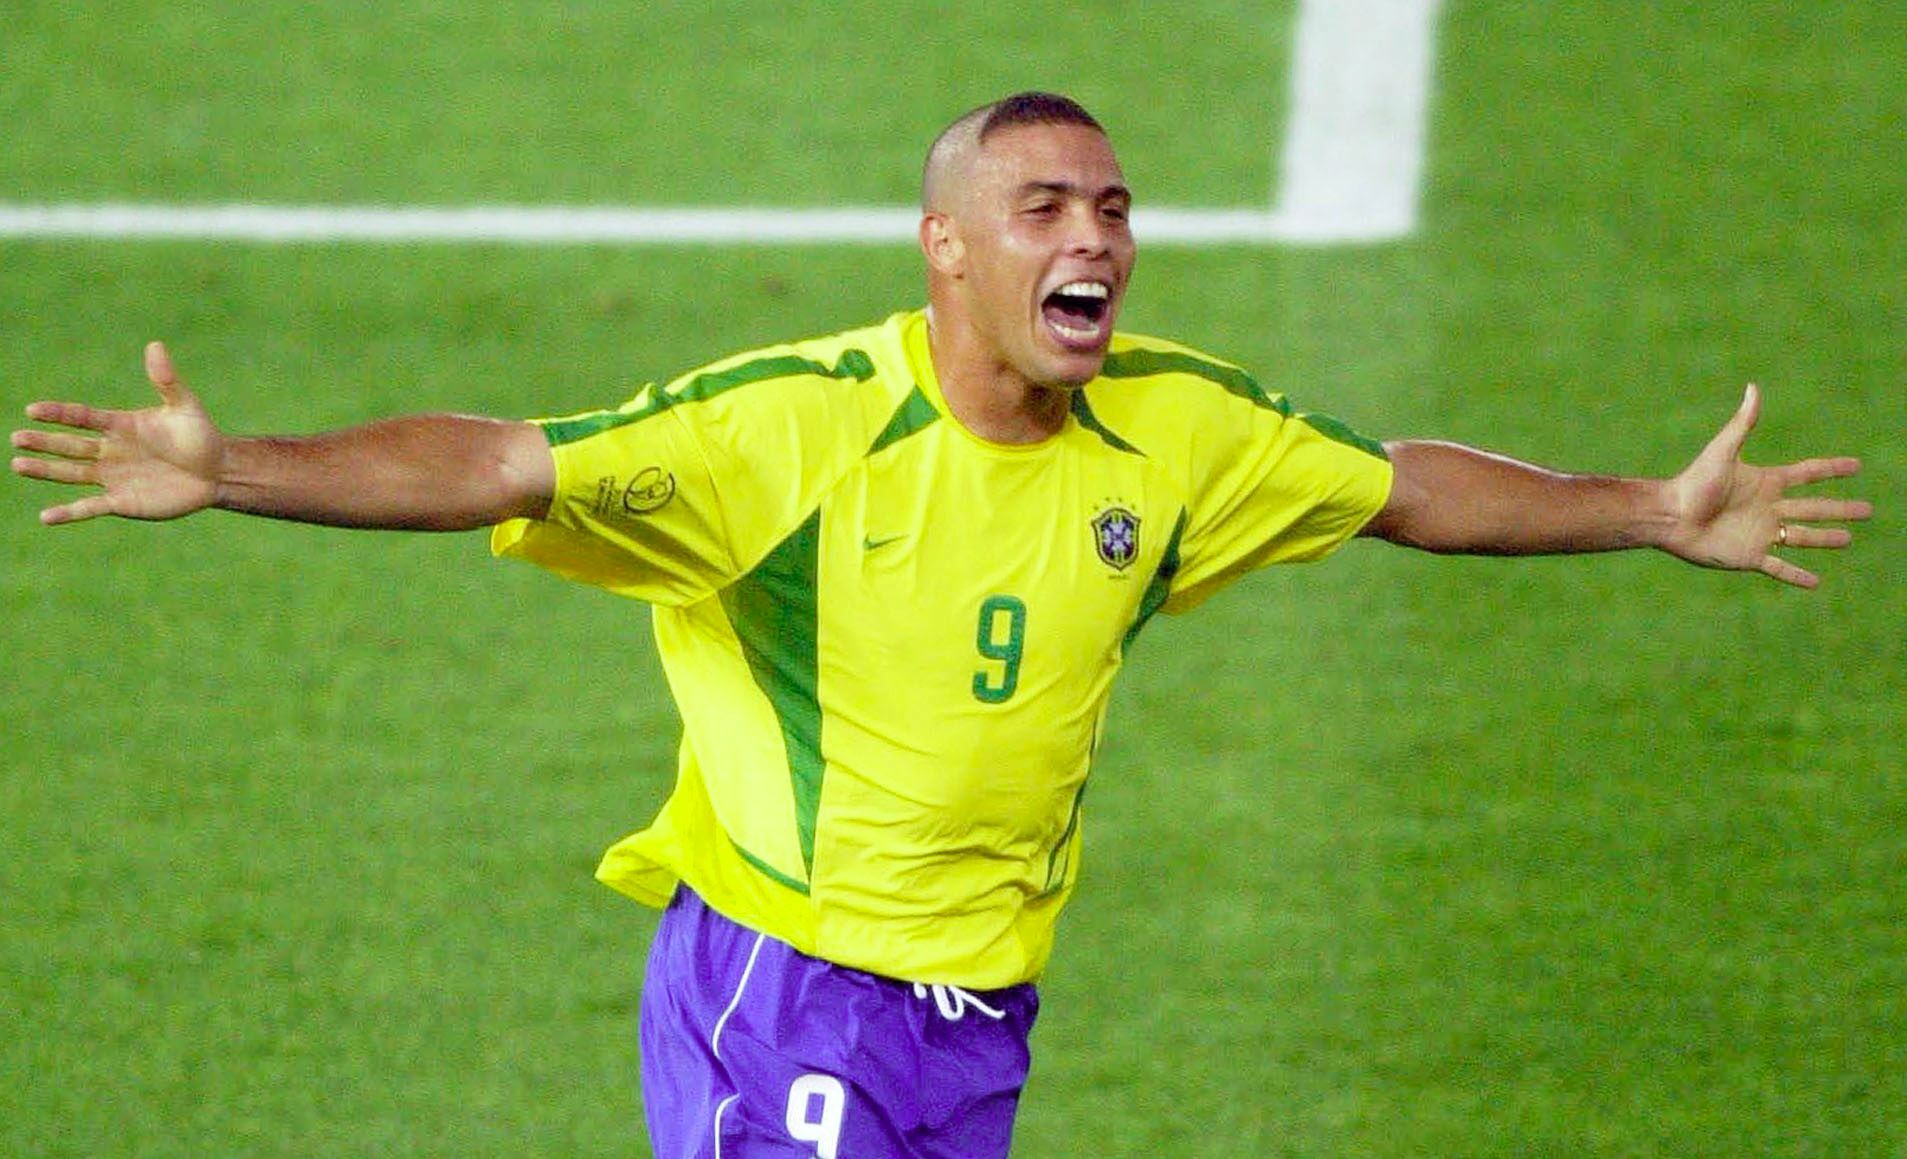 Ronaldo in the 2002 World Cup final